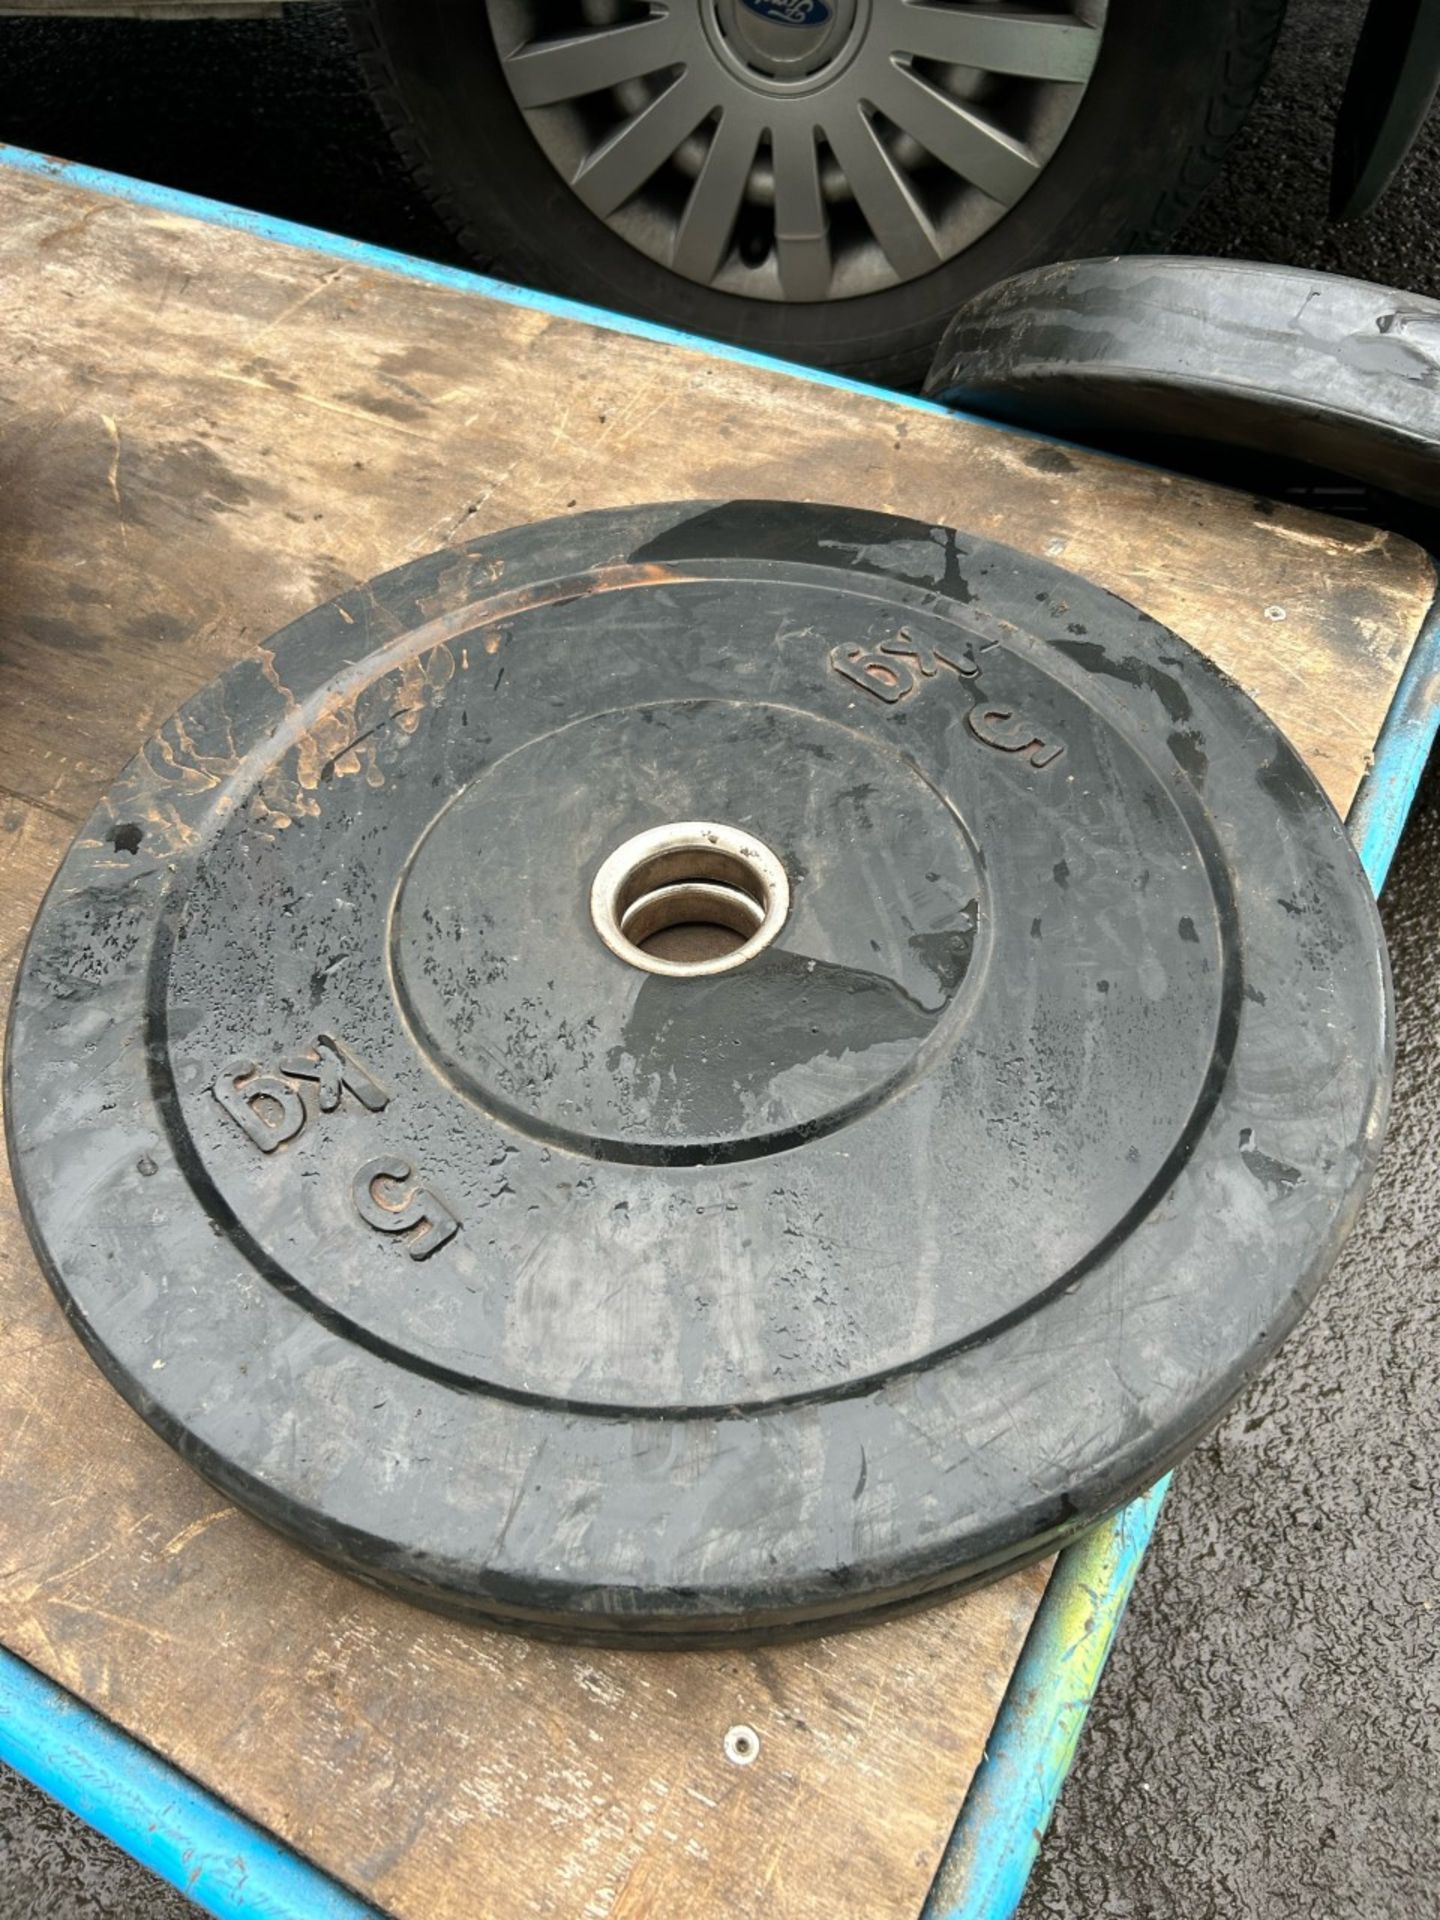 2x 5kg rubber Olympic weights plates